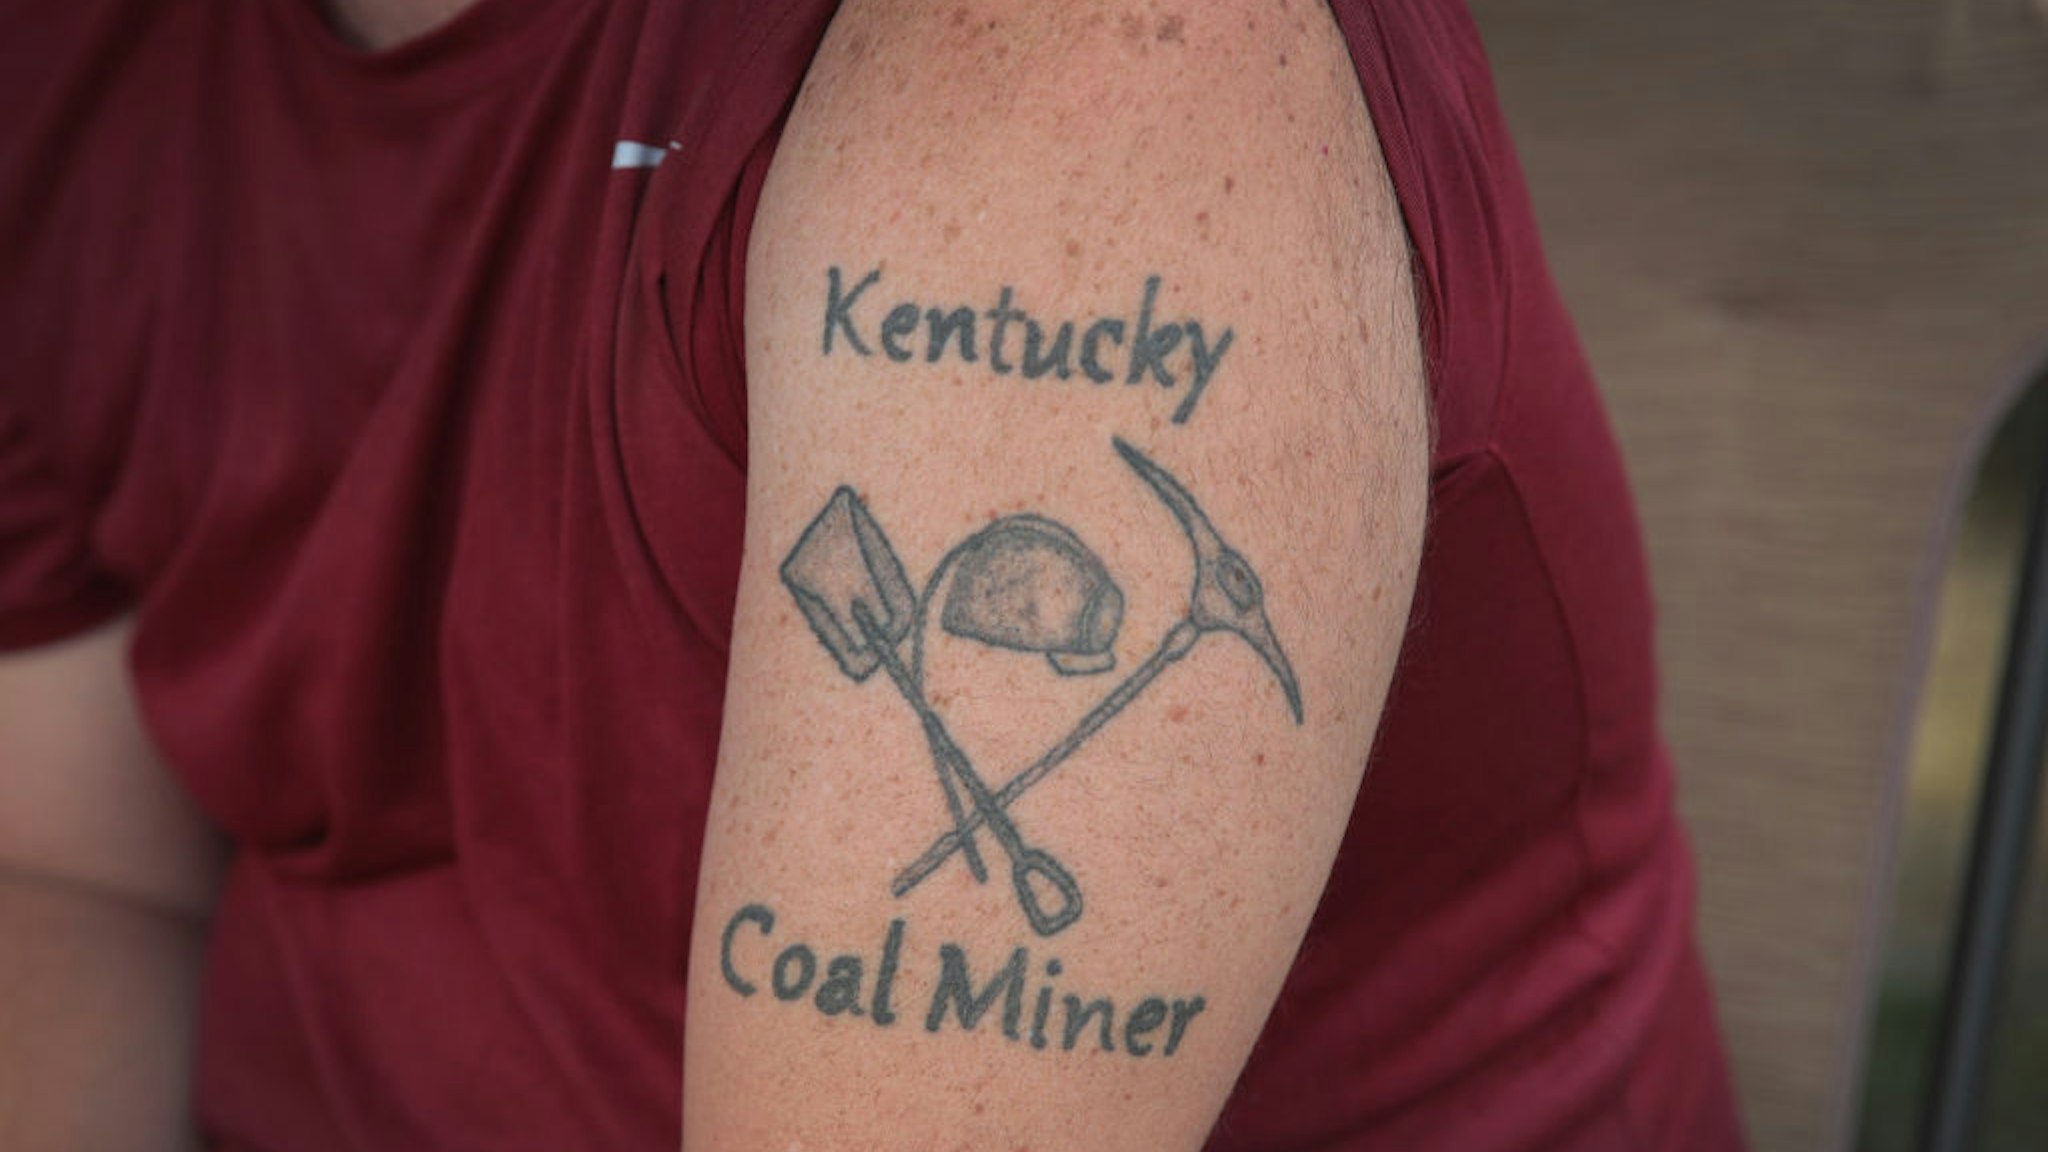 CUMBERLAND, KENTUCKY - AUGUST 08: Unemployed Blackjewel coal miner Chris Lewis shows his tattoo as he participates in a blockade along the railroad tracks that lead to one of Blackjewel's mines on August 08, 2019 near Cumberland, Kentucky. The Blackjewel miners of Harlan County unexpectedly found themselves unemployed when Blackjewel declared bankruptcy and shut down their mines. Just as unexpected was the discovery that the miner's final paychecks had bounced. When a few of the miners learned the company was shipping out a final load of coal by rail they decided to blockade the tracks to prevent the shipment from leaving the mine until they were paid their wages. The blockade, which is in its 11th day, has received a local and national outpouring of support.